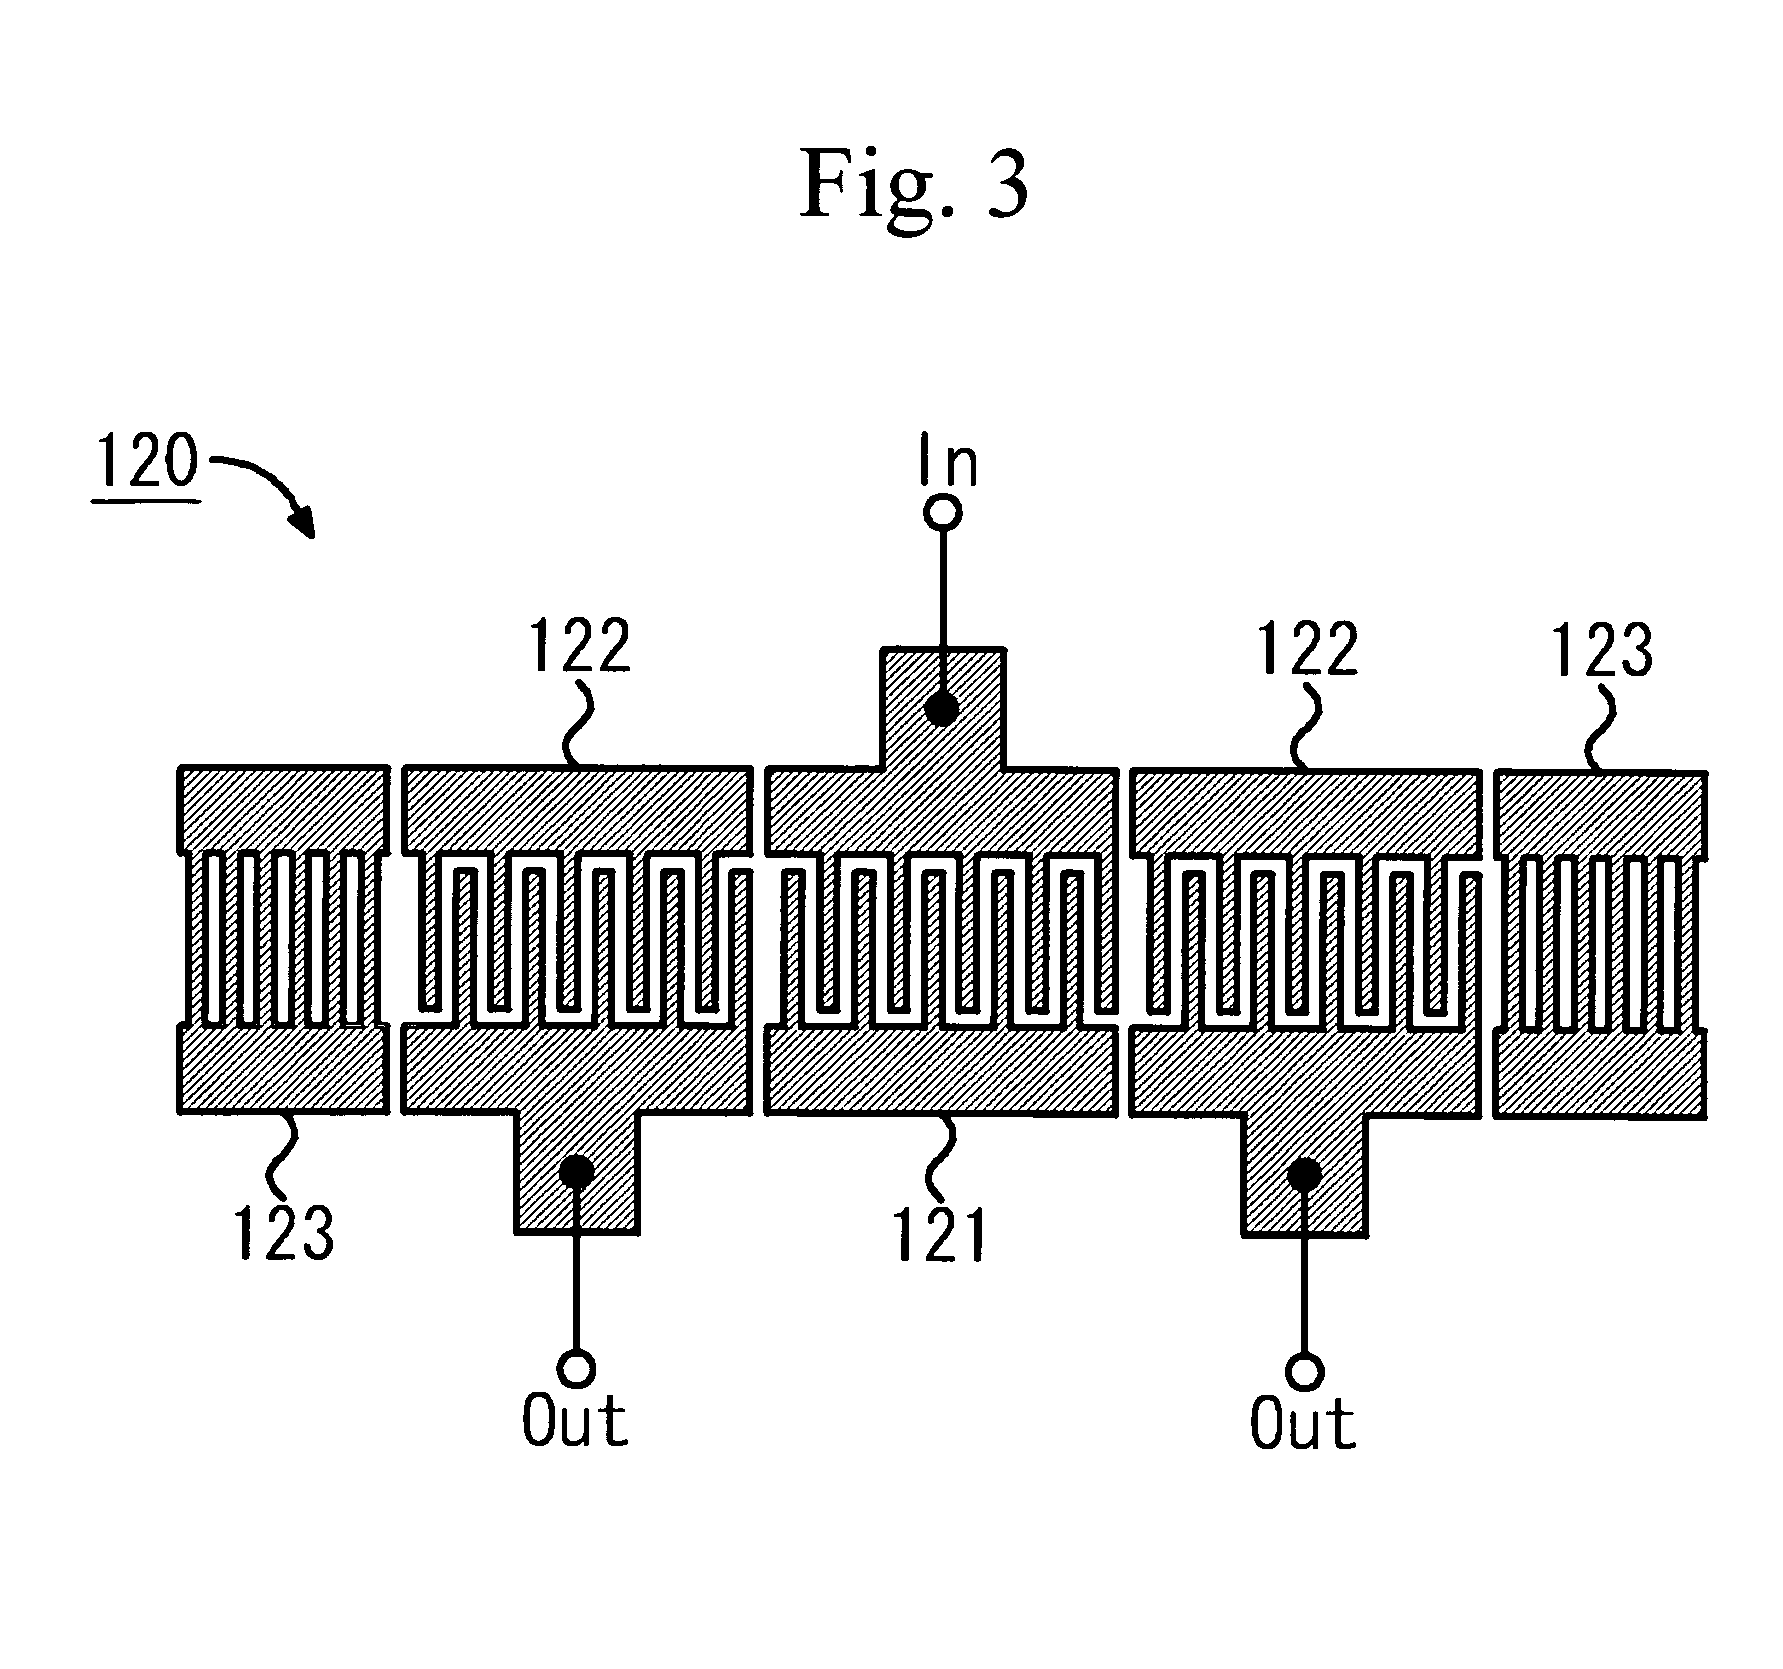 Duplexer having two surface acoustic wave filters on one substrate